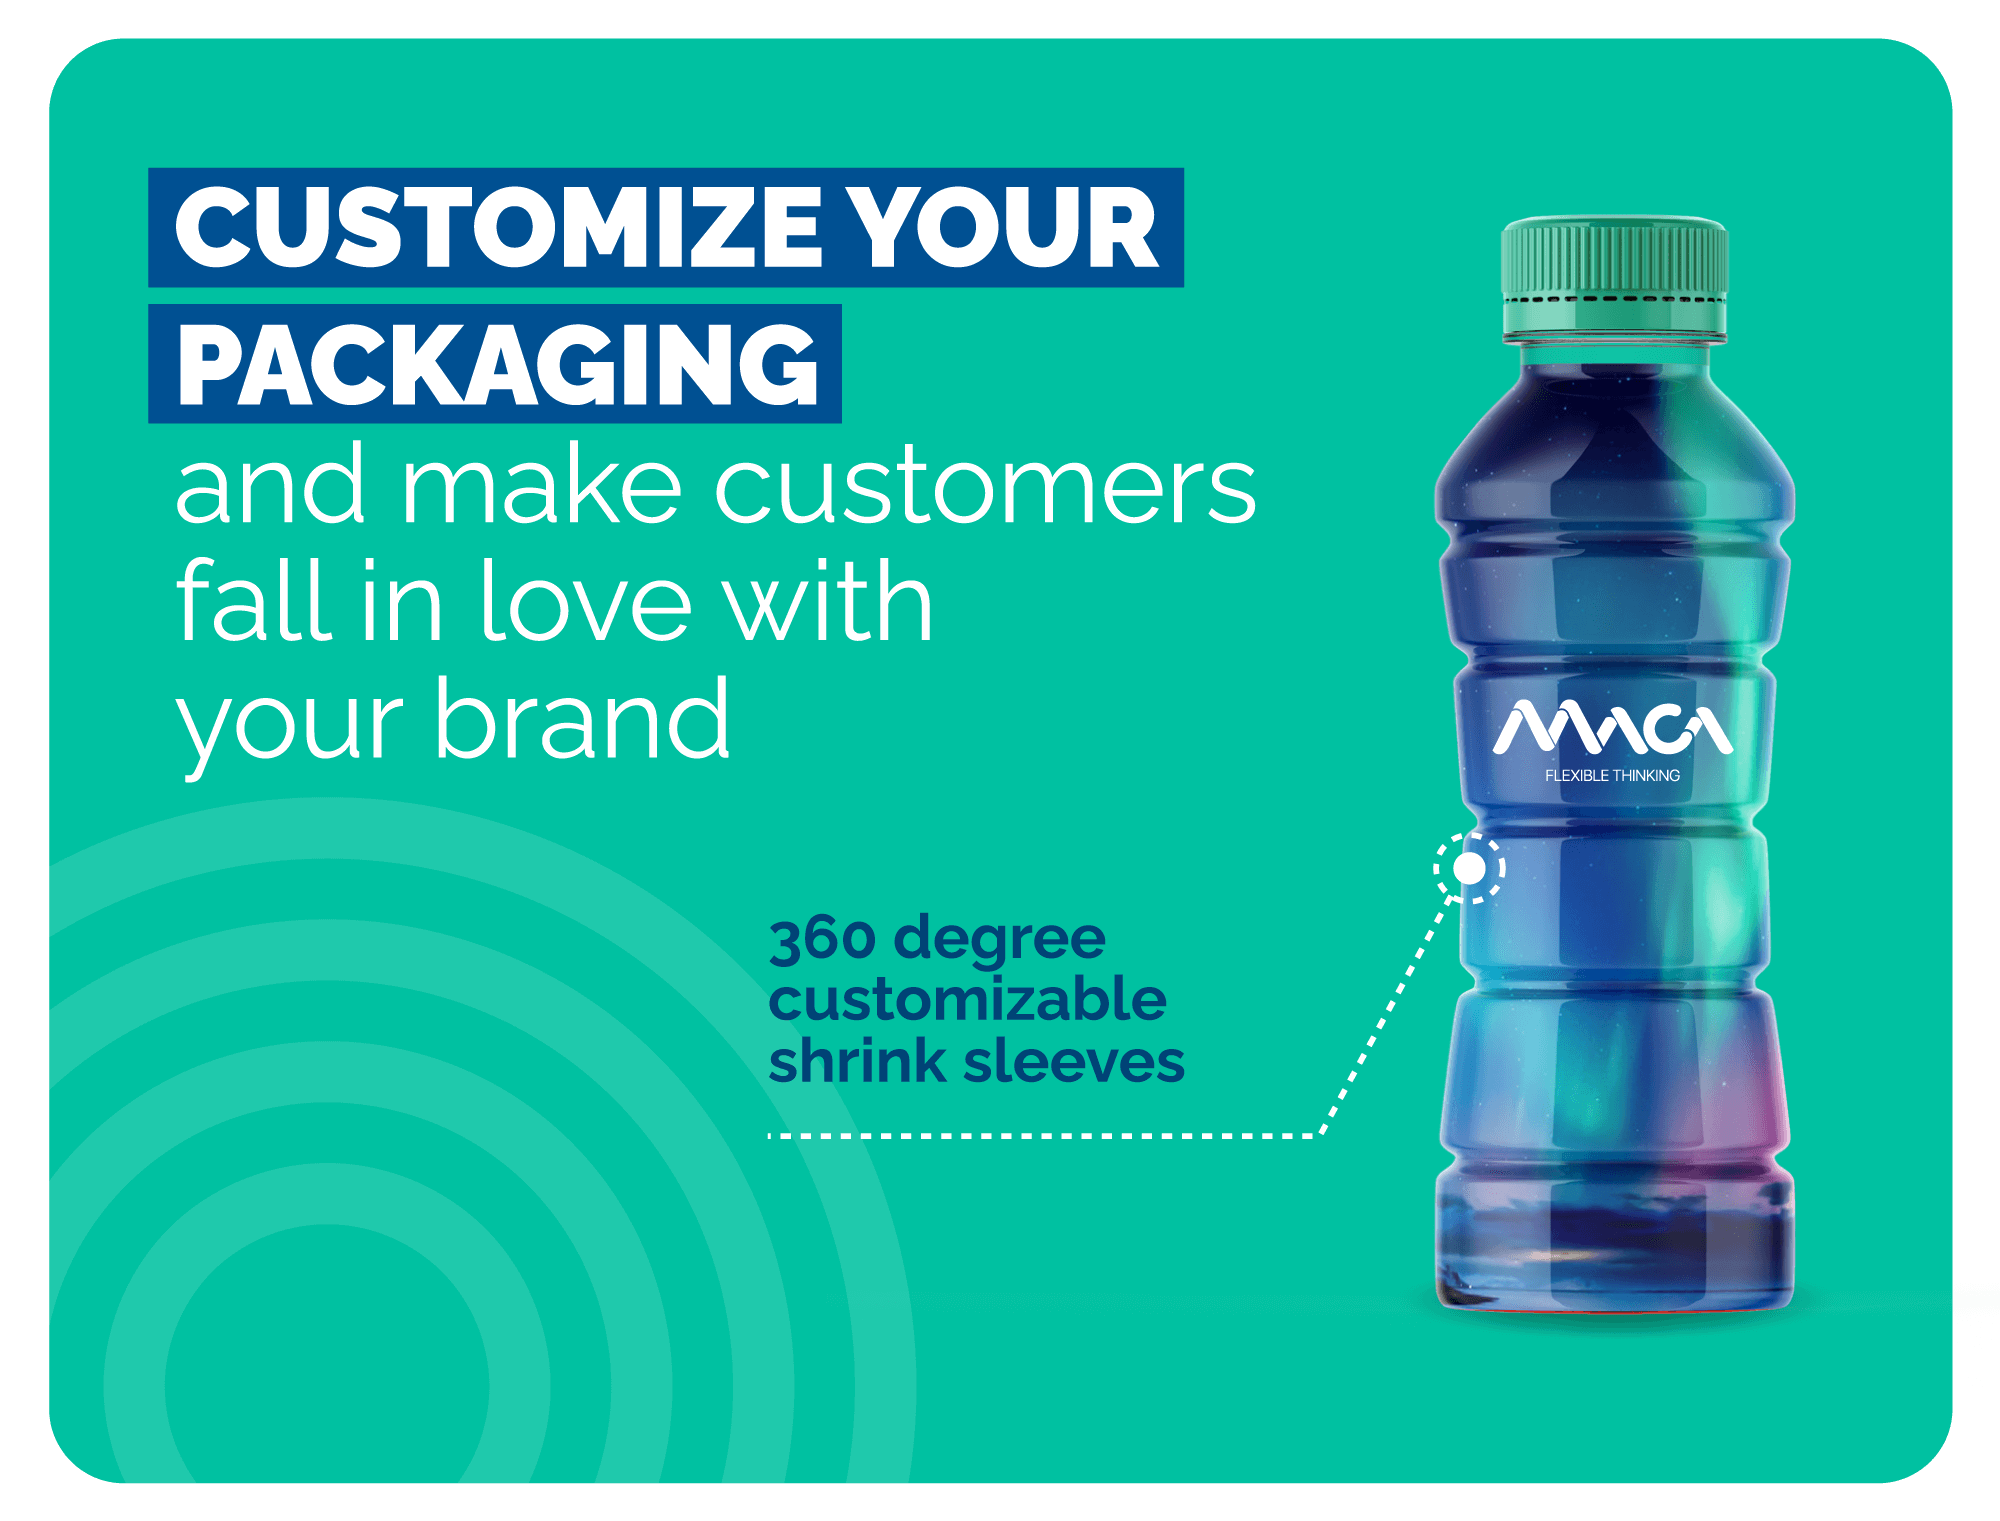 Customize your packaging and make your customers fall in love with your brand